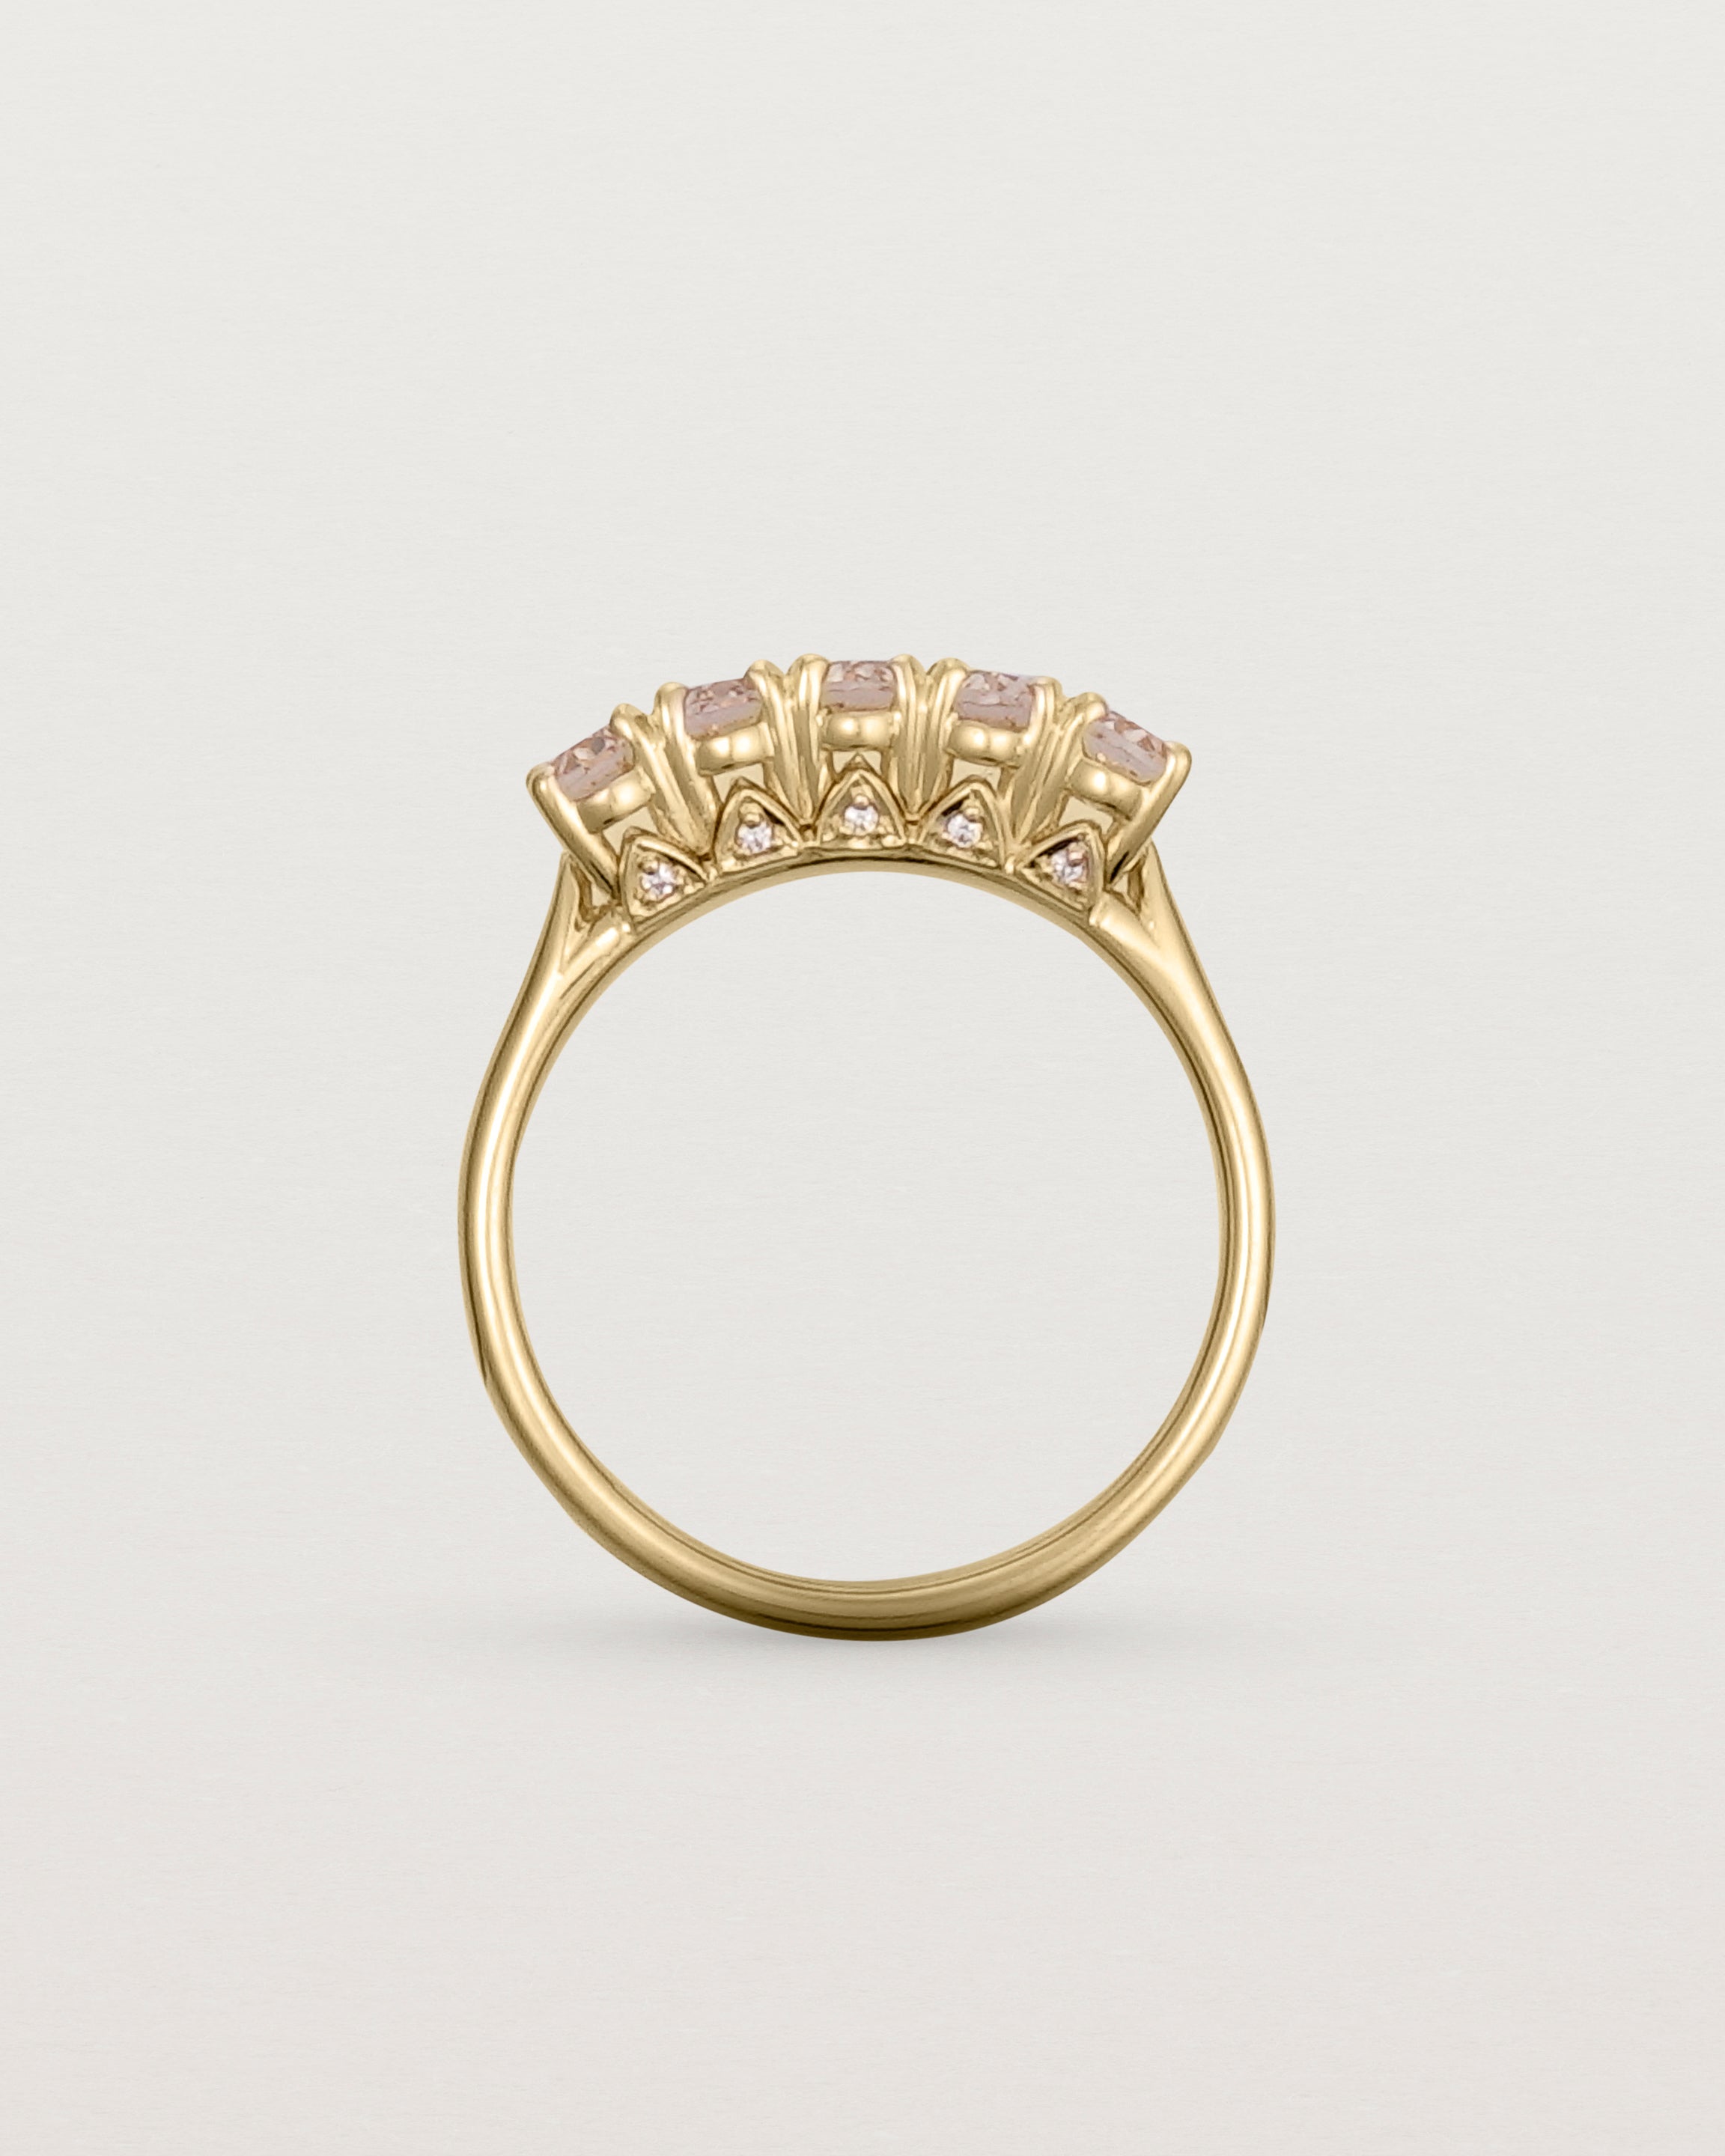 Standing view of the Fiore Wrap Ring | Savannah Sunstone | Yellow Gold.